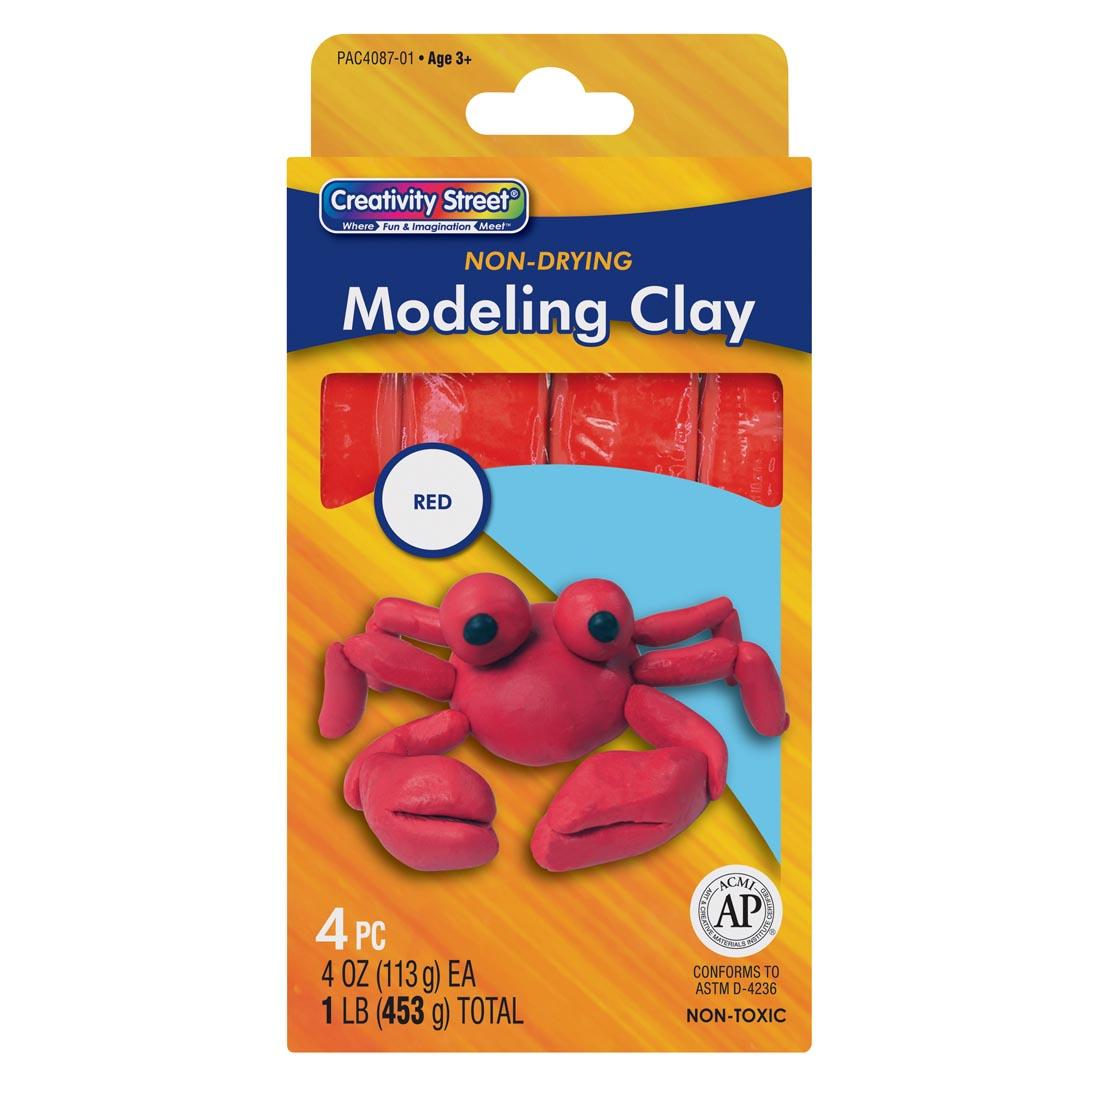 Red Creativity Street Modeling Clay